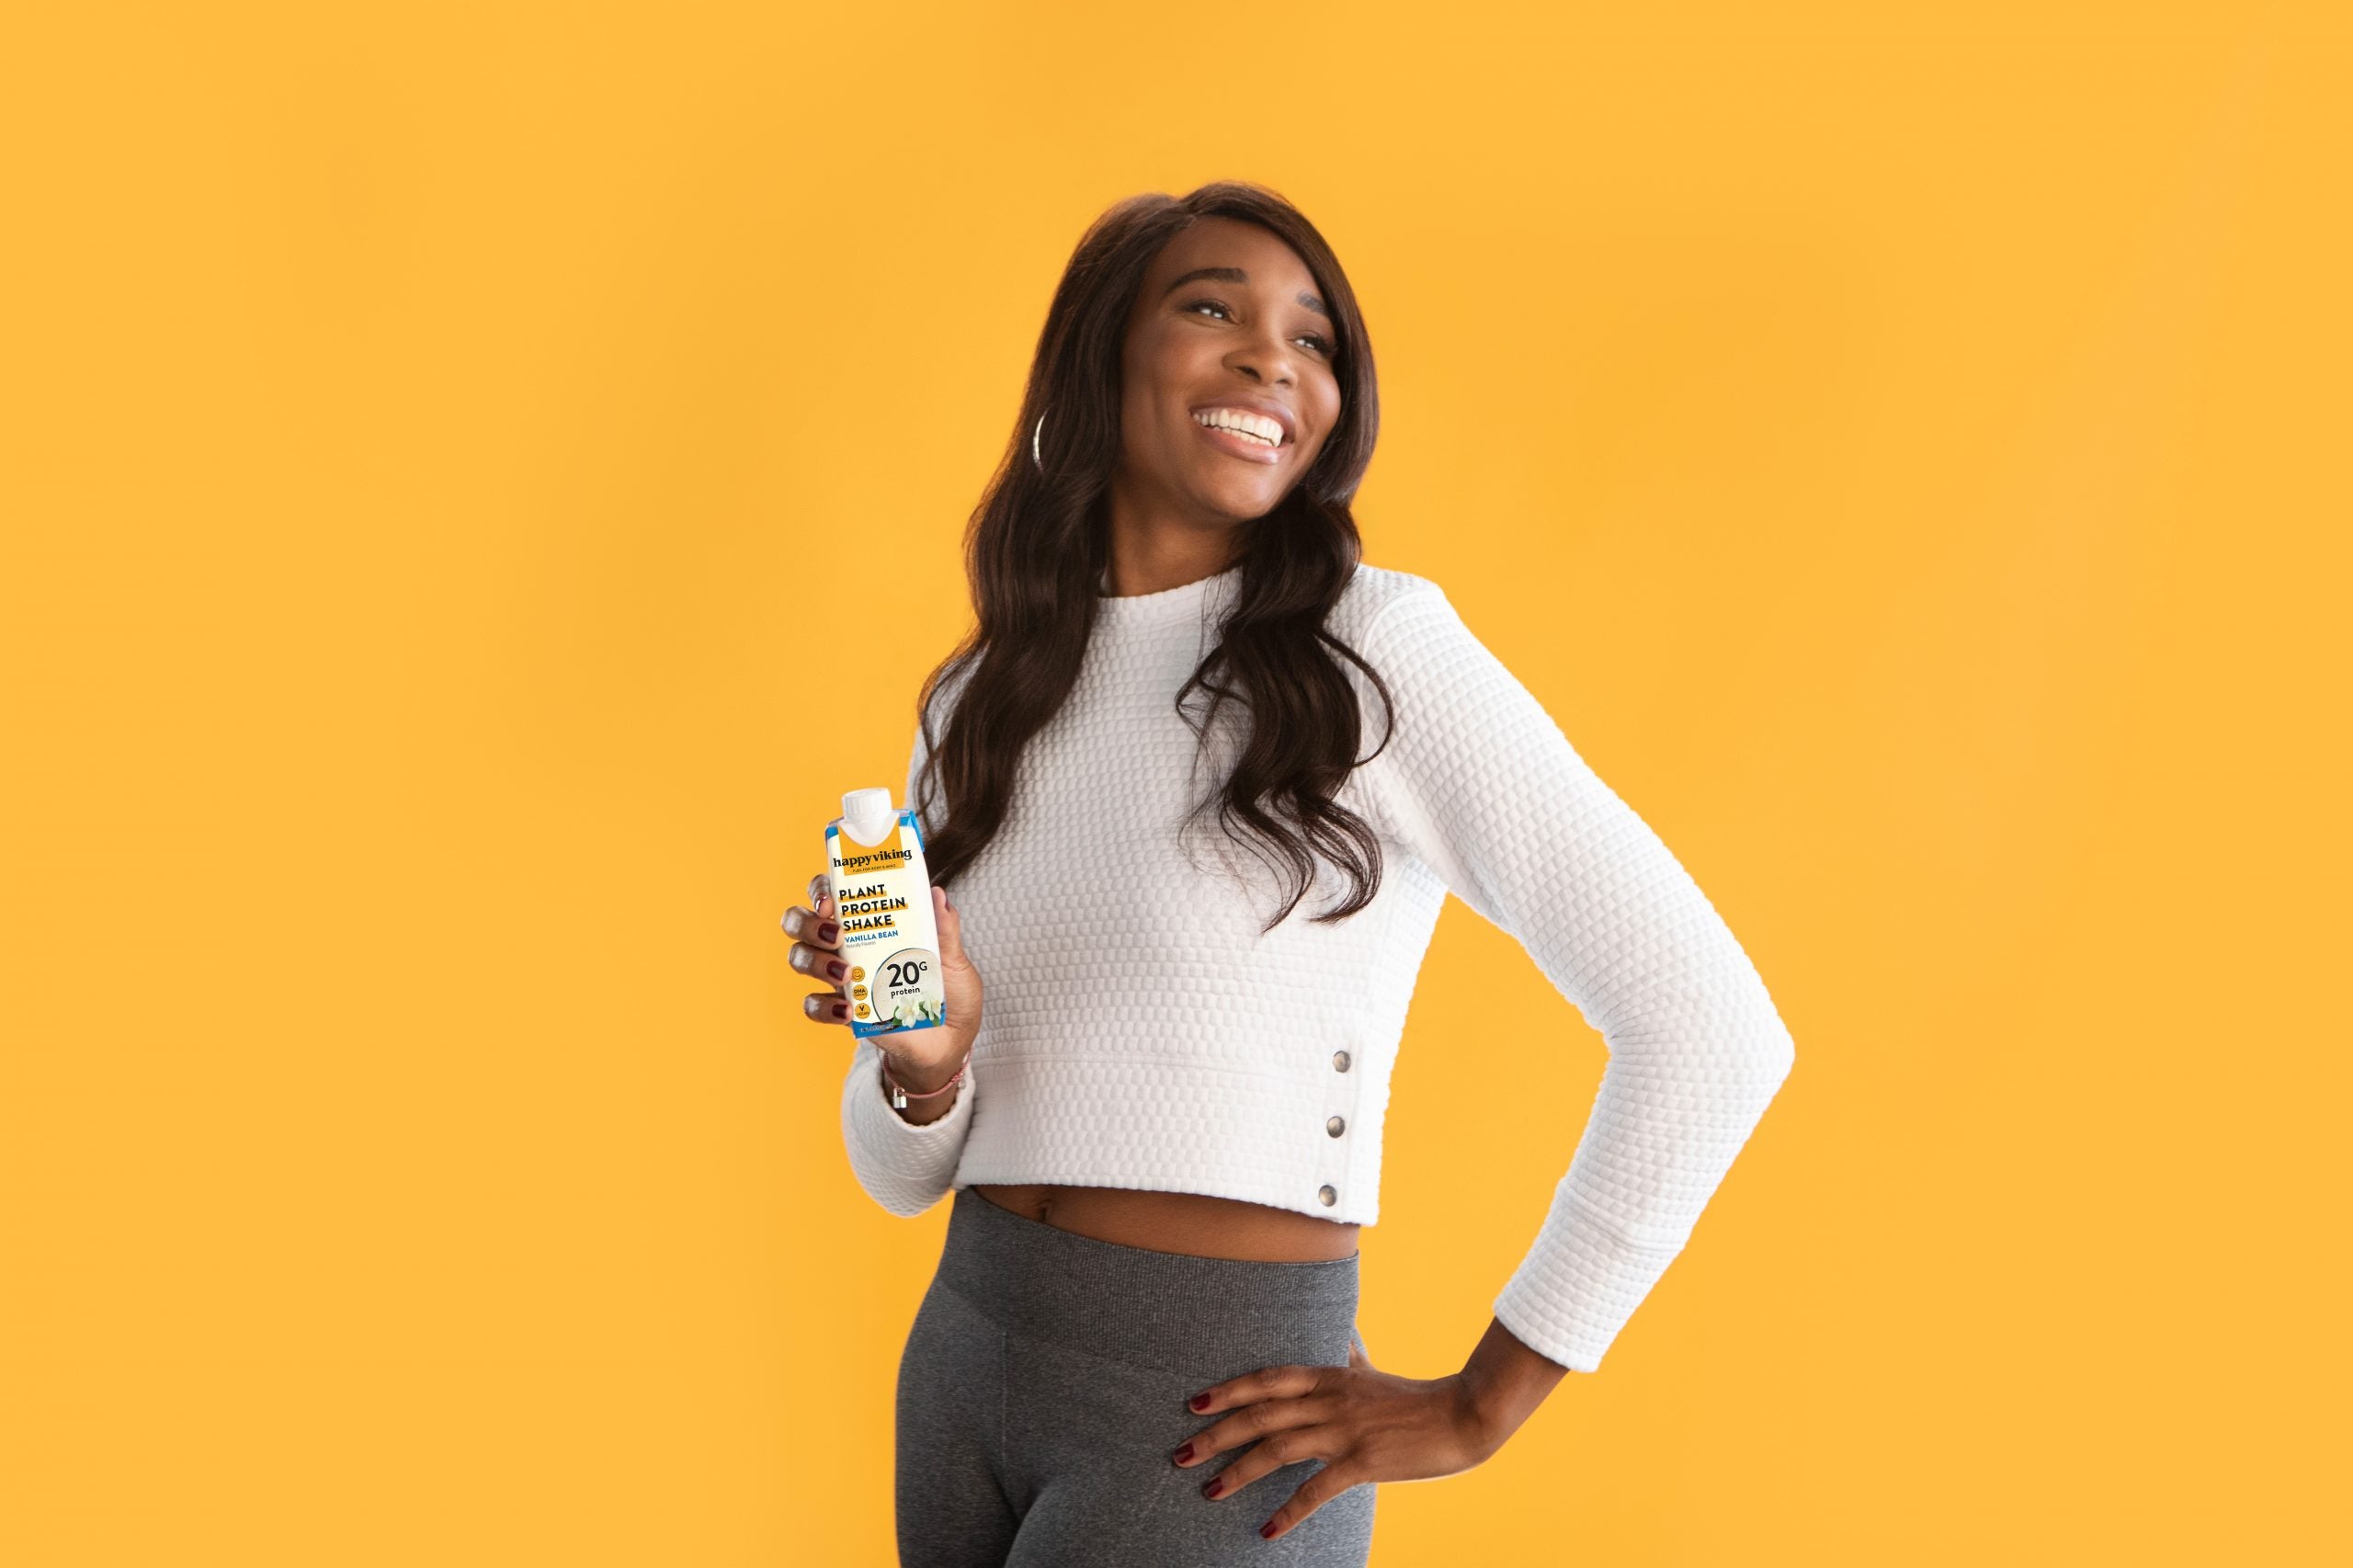 Venus Williams Launches New Vegan Protein Shakes, Shares Benefits of Plant-Based Diet